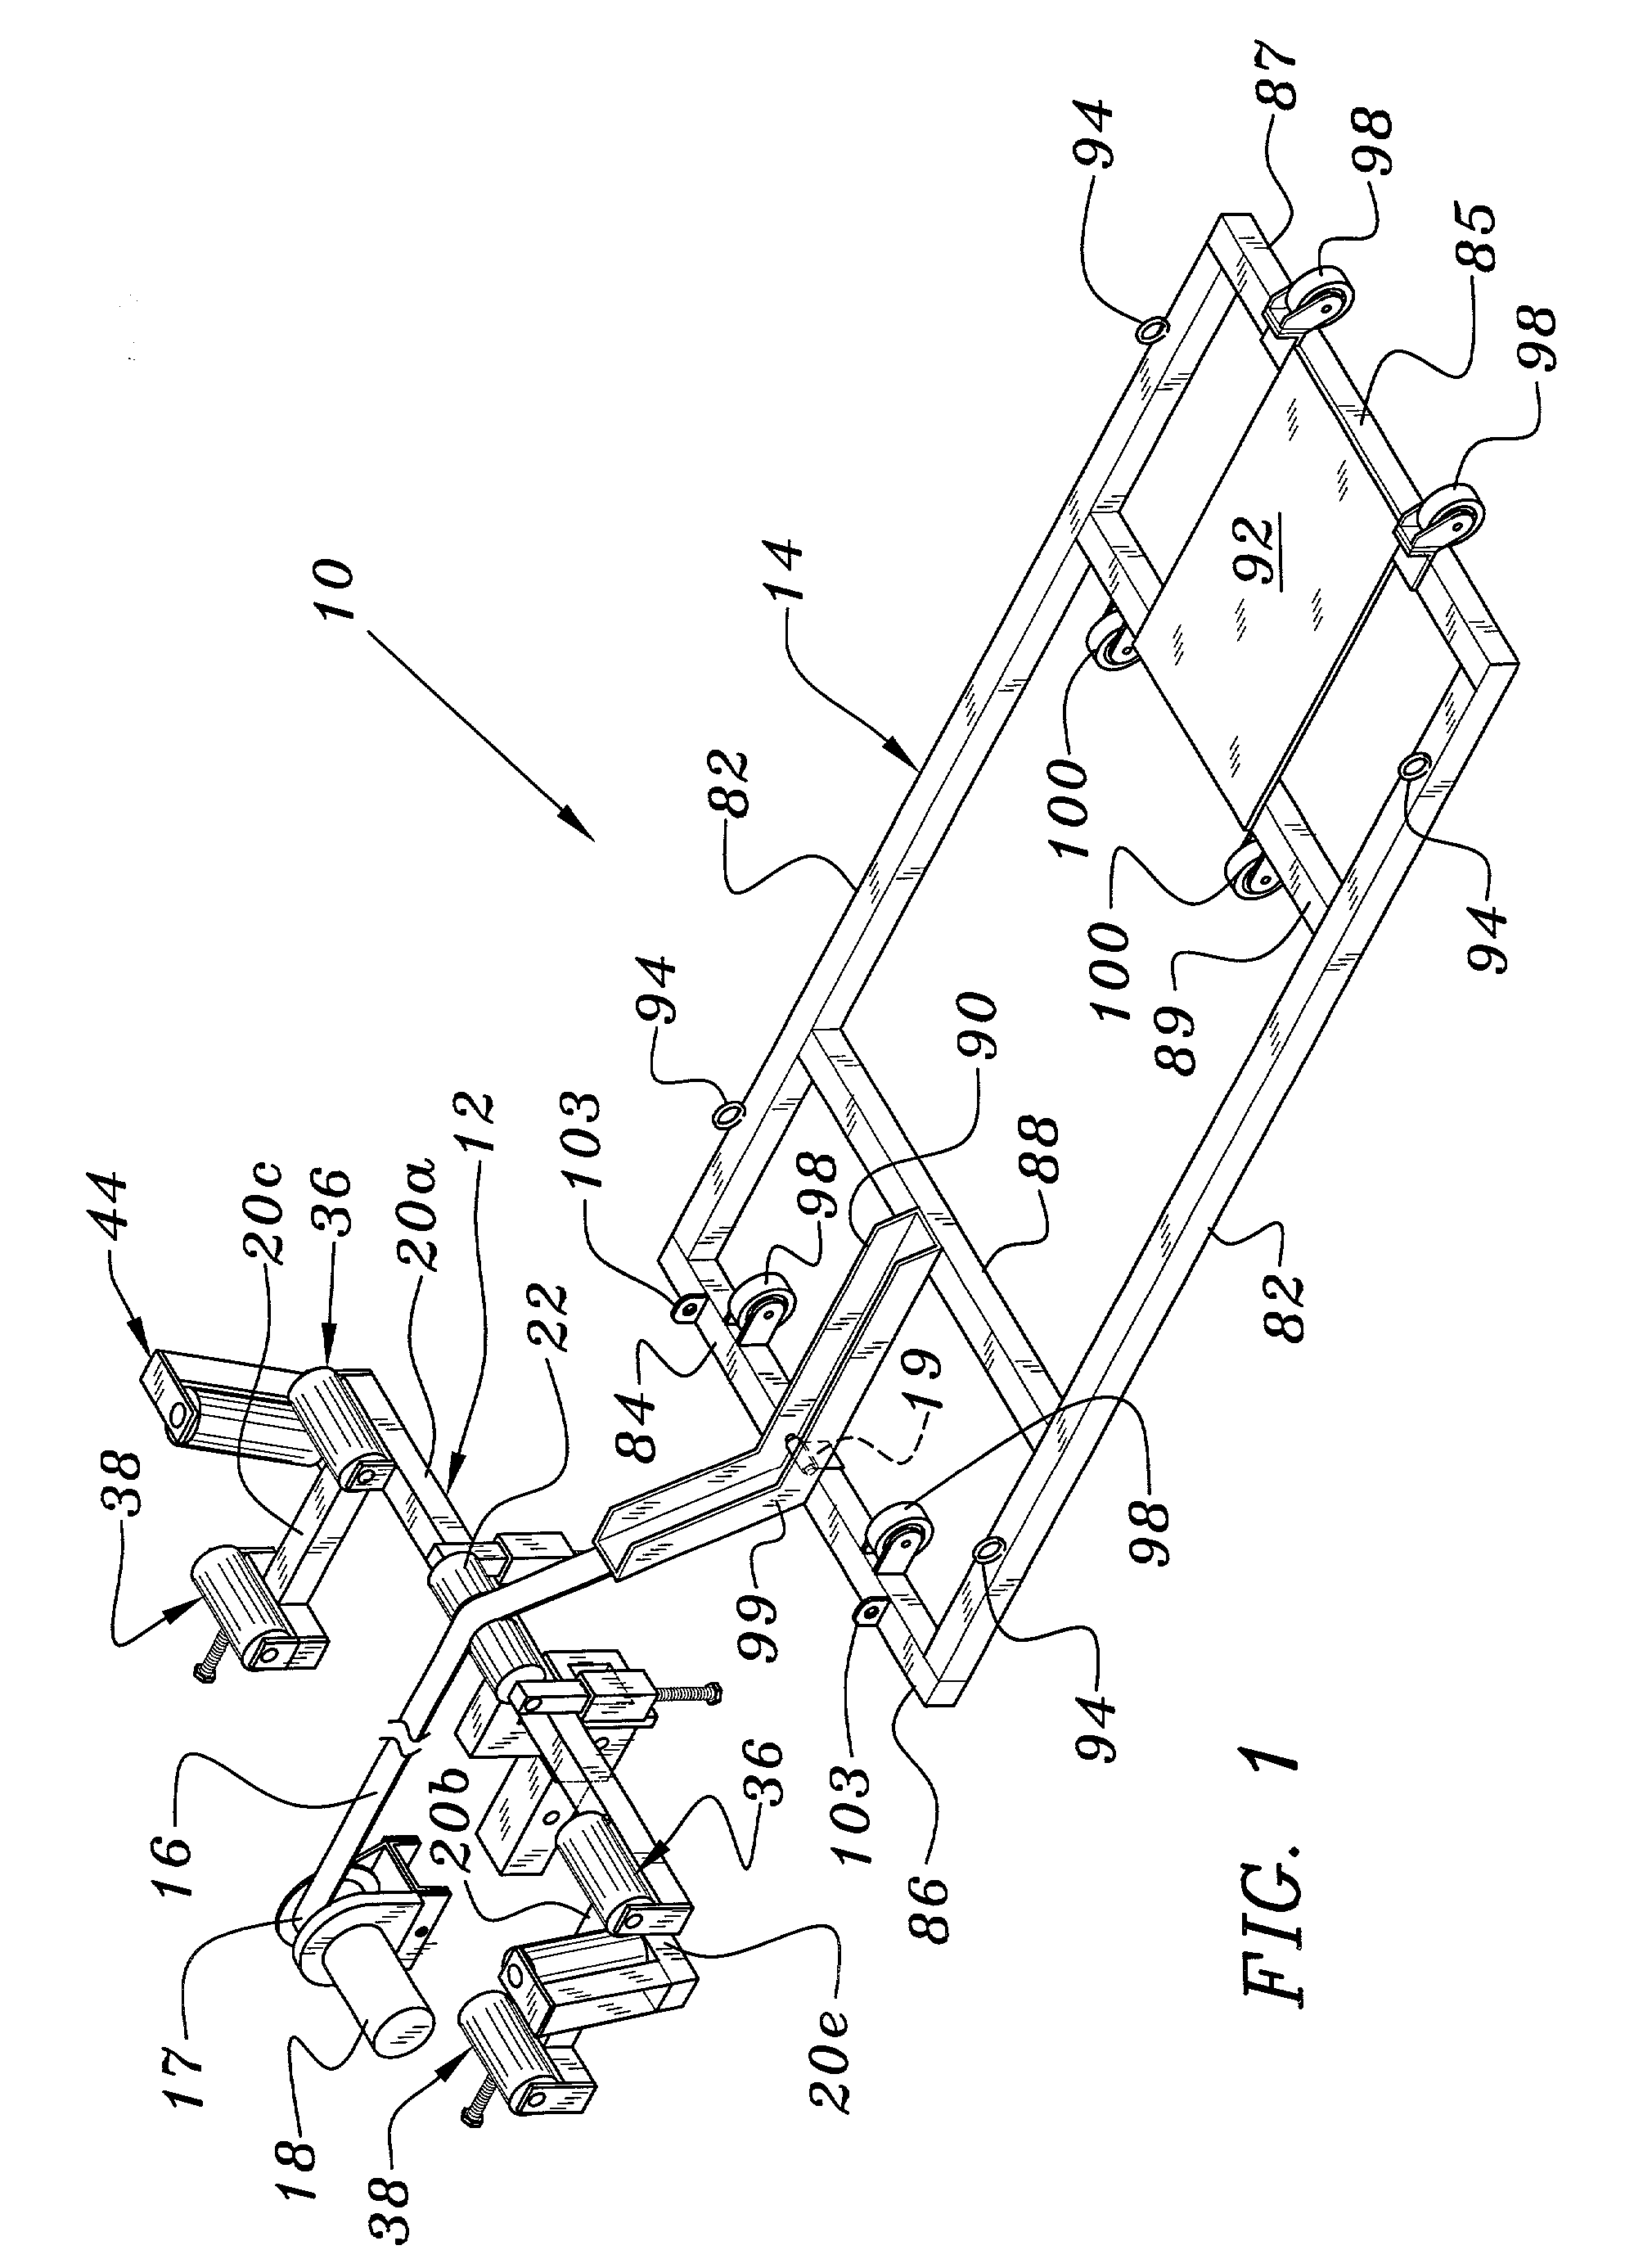 Apparatus for loading cargo into vehicles